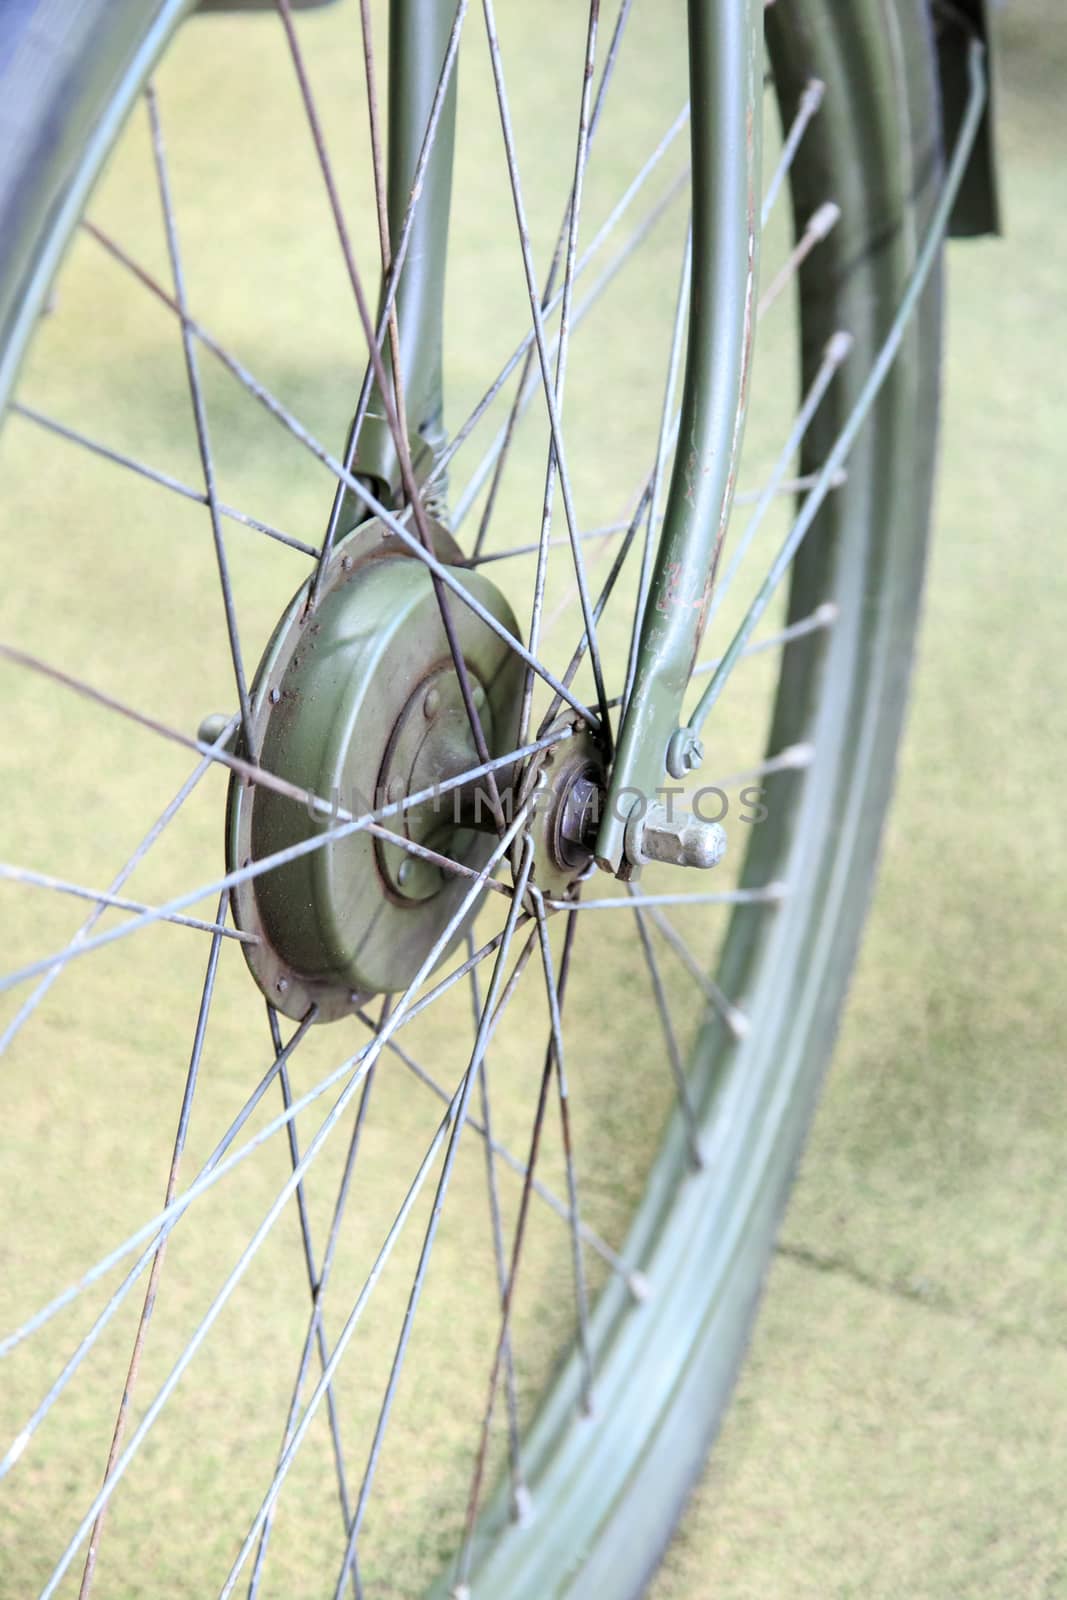 Close up detailed view of steering wheelsand rims of vintage bicycle.